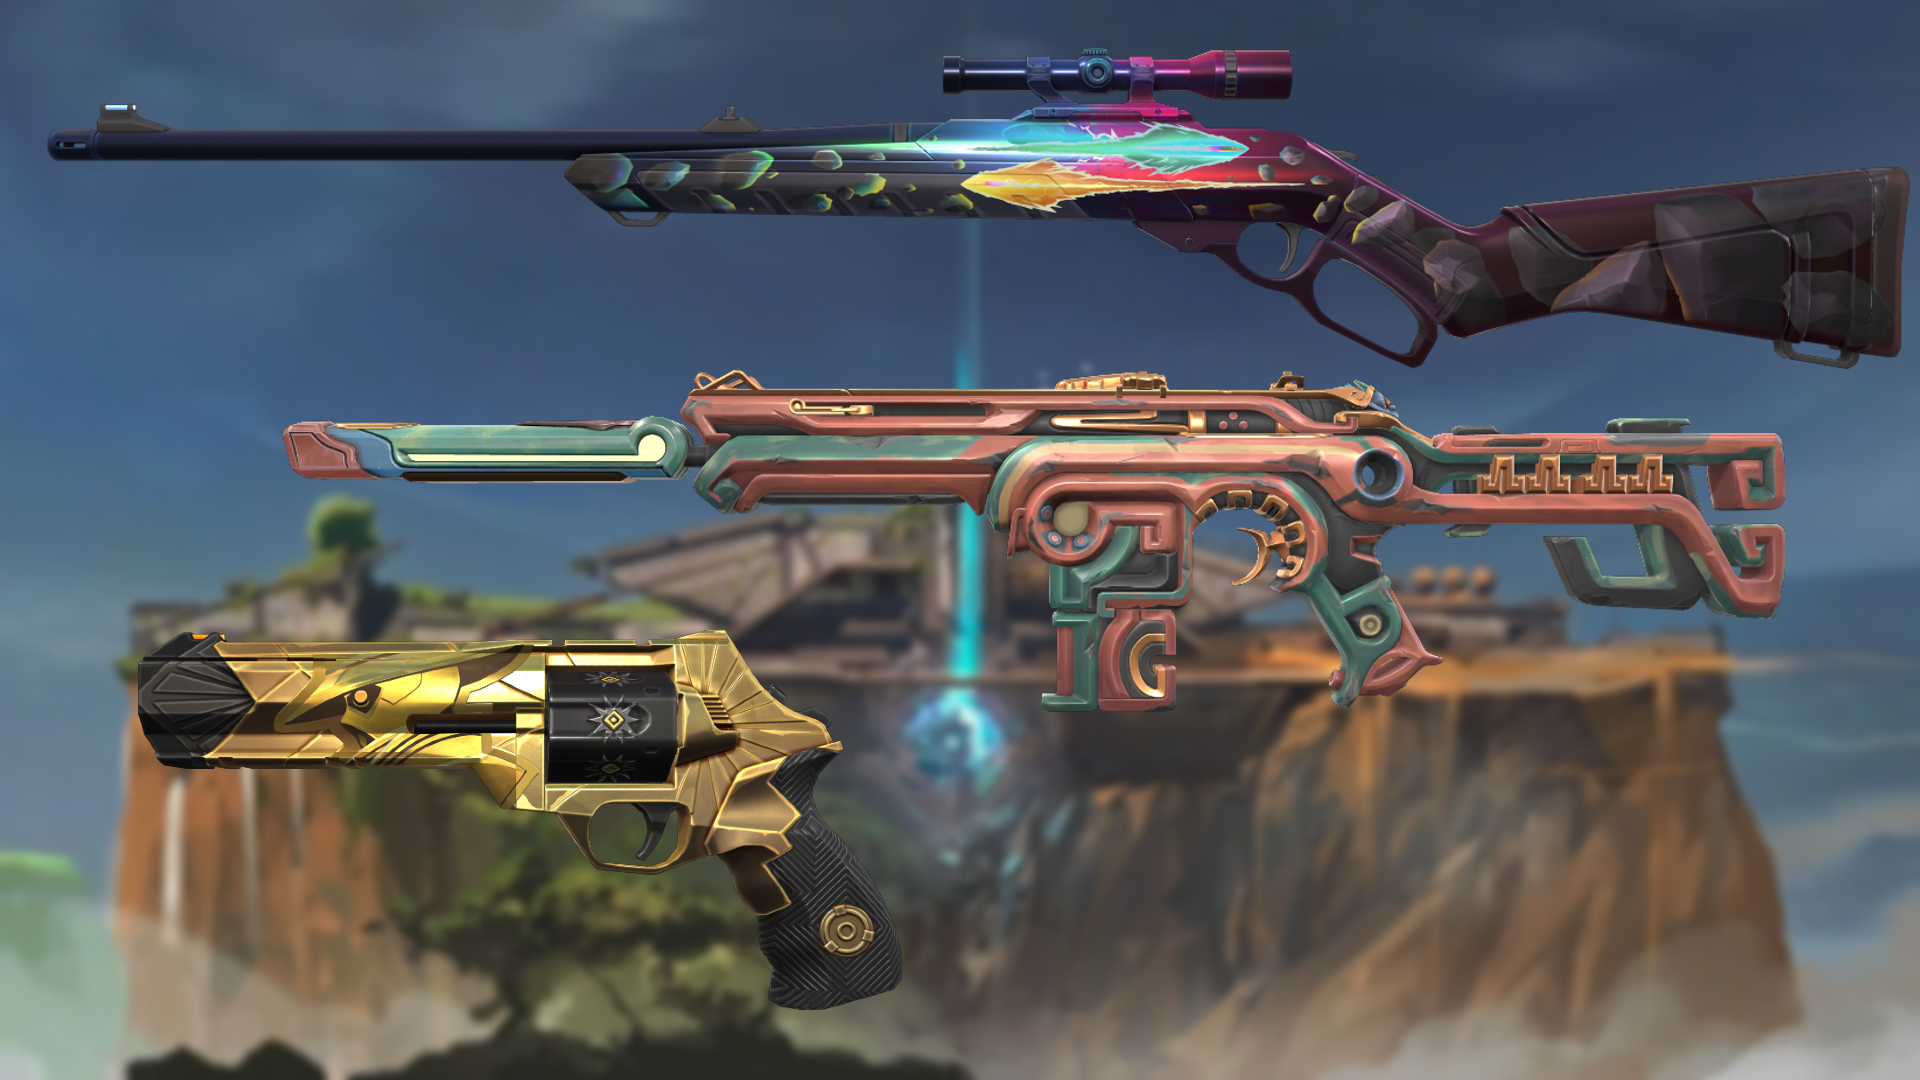 Valorant battle pass for Episode 5 Act 2: Skins, cards and gun buddies: This image shows some of the skins available in the Valorant battle pass for Episode 5 Act 2